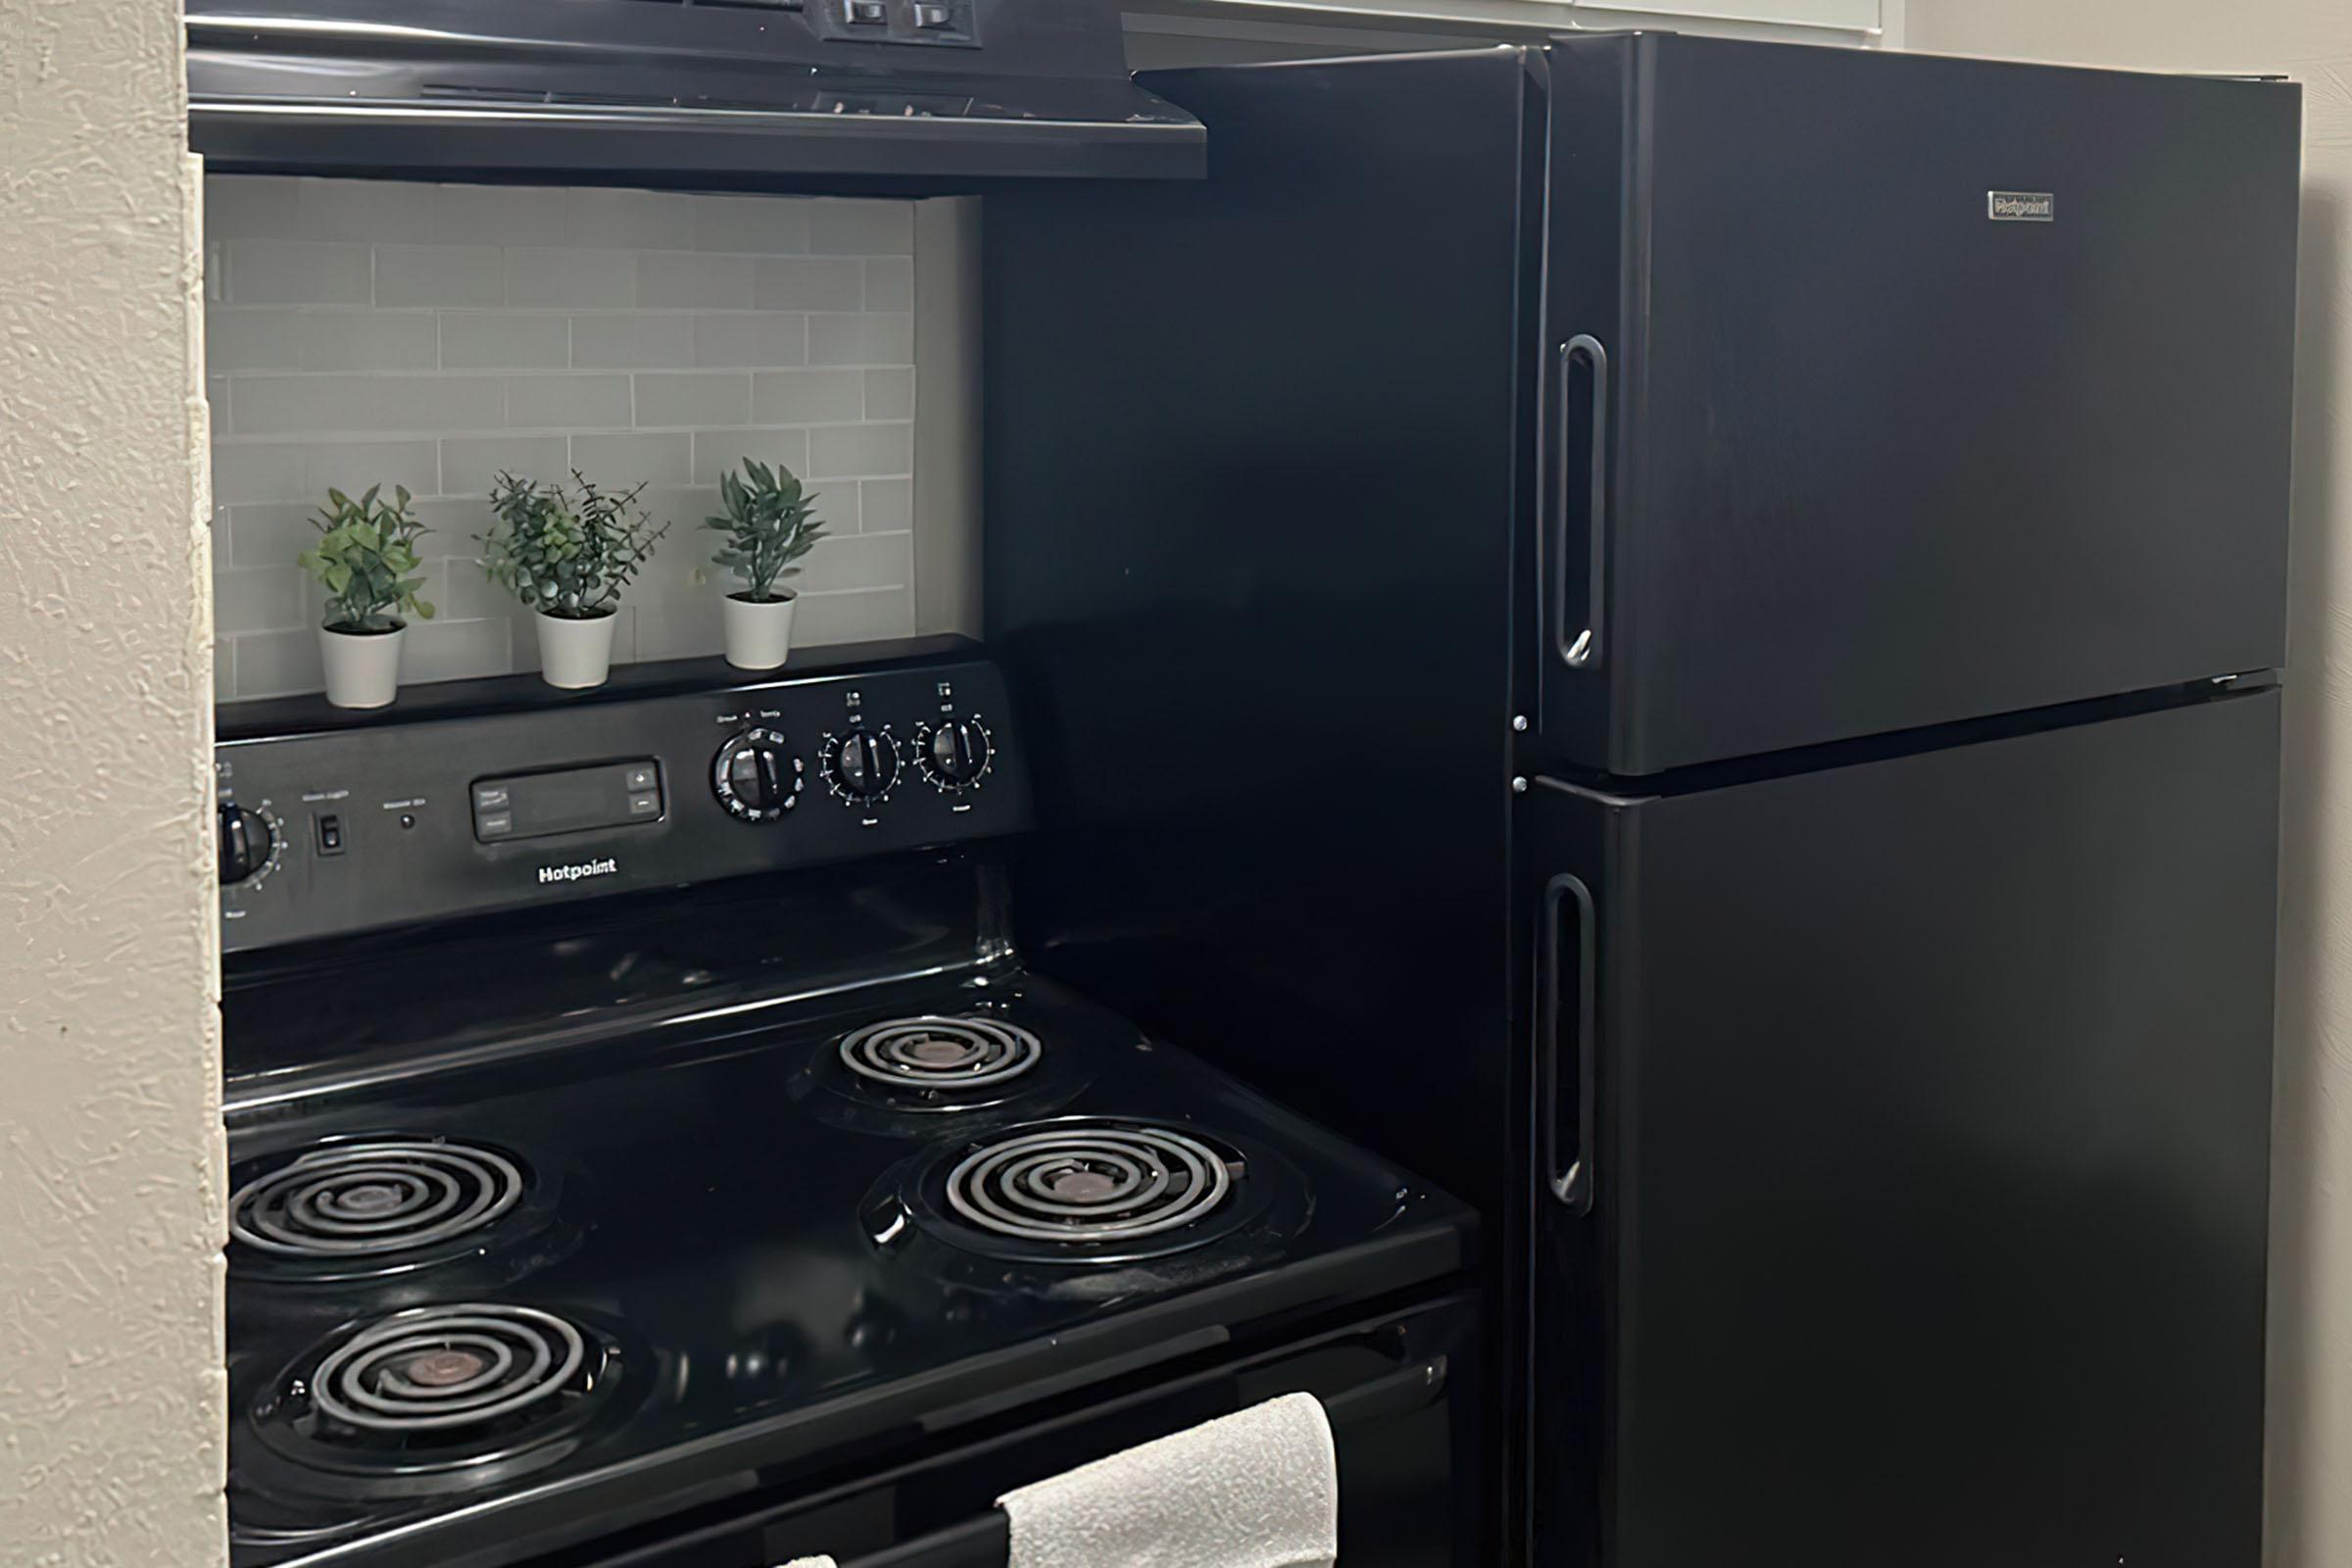 a stove top oven sitting inside of a refrigerator